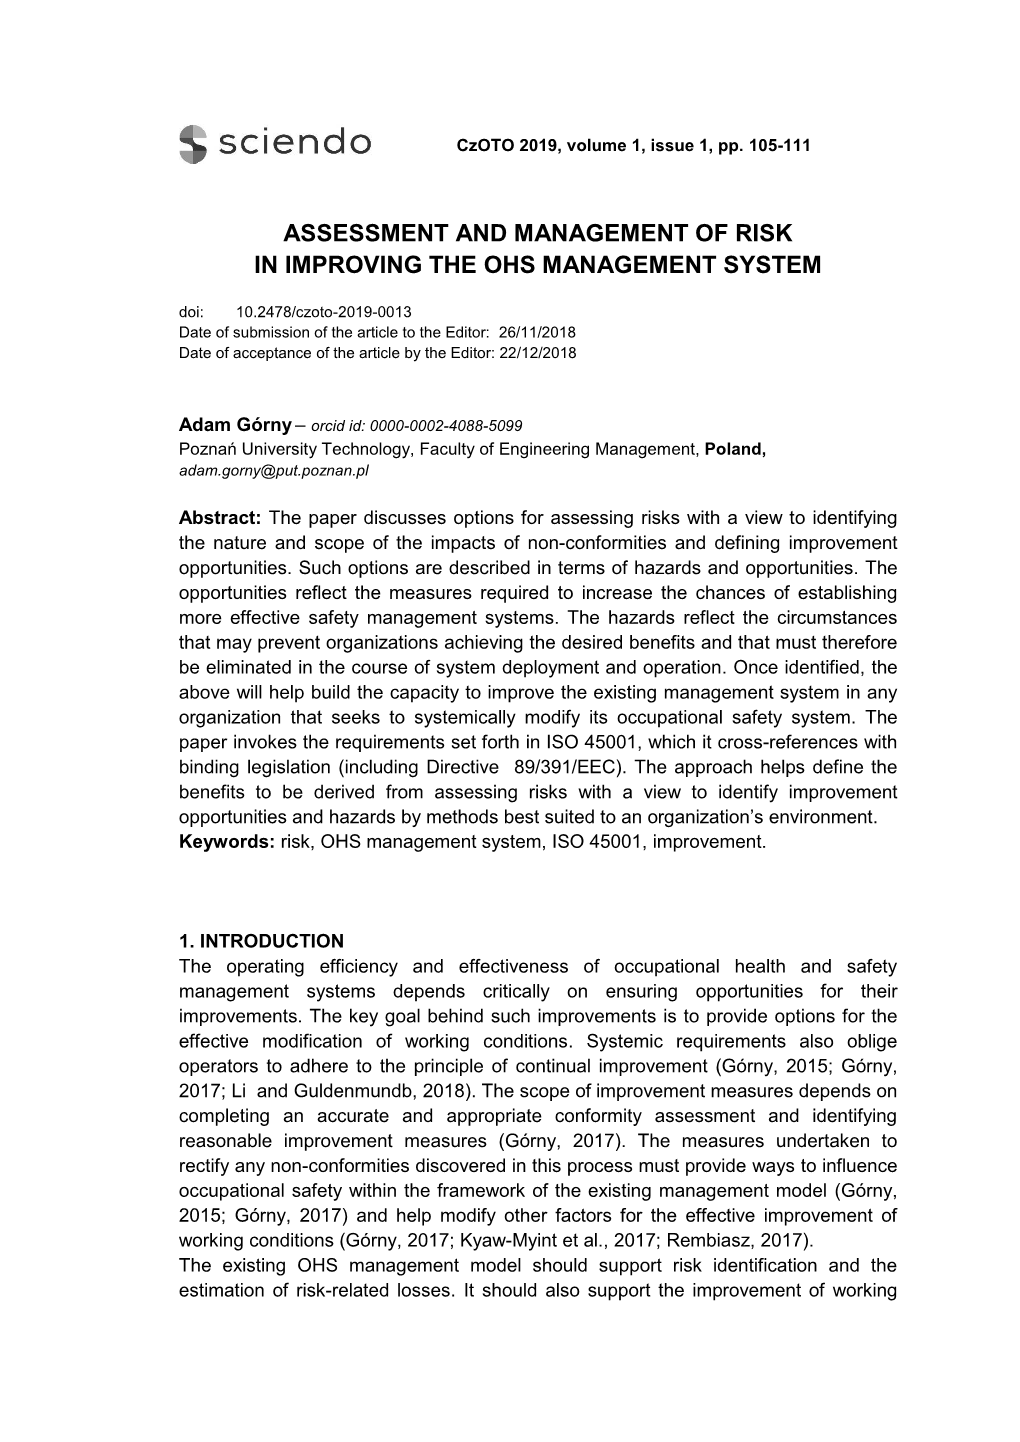 Assessment and Management of Risk in Improving the Ohs